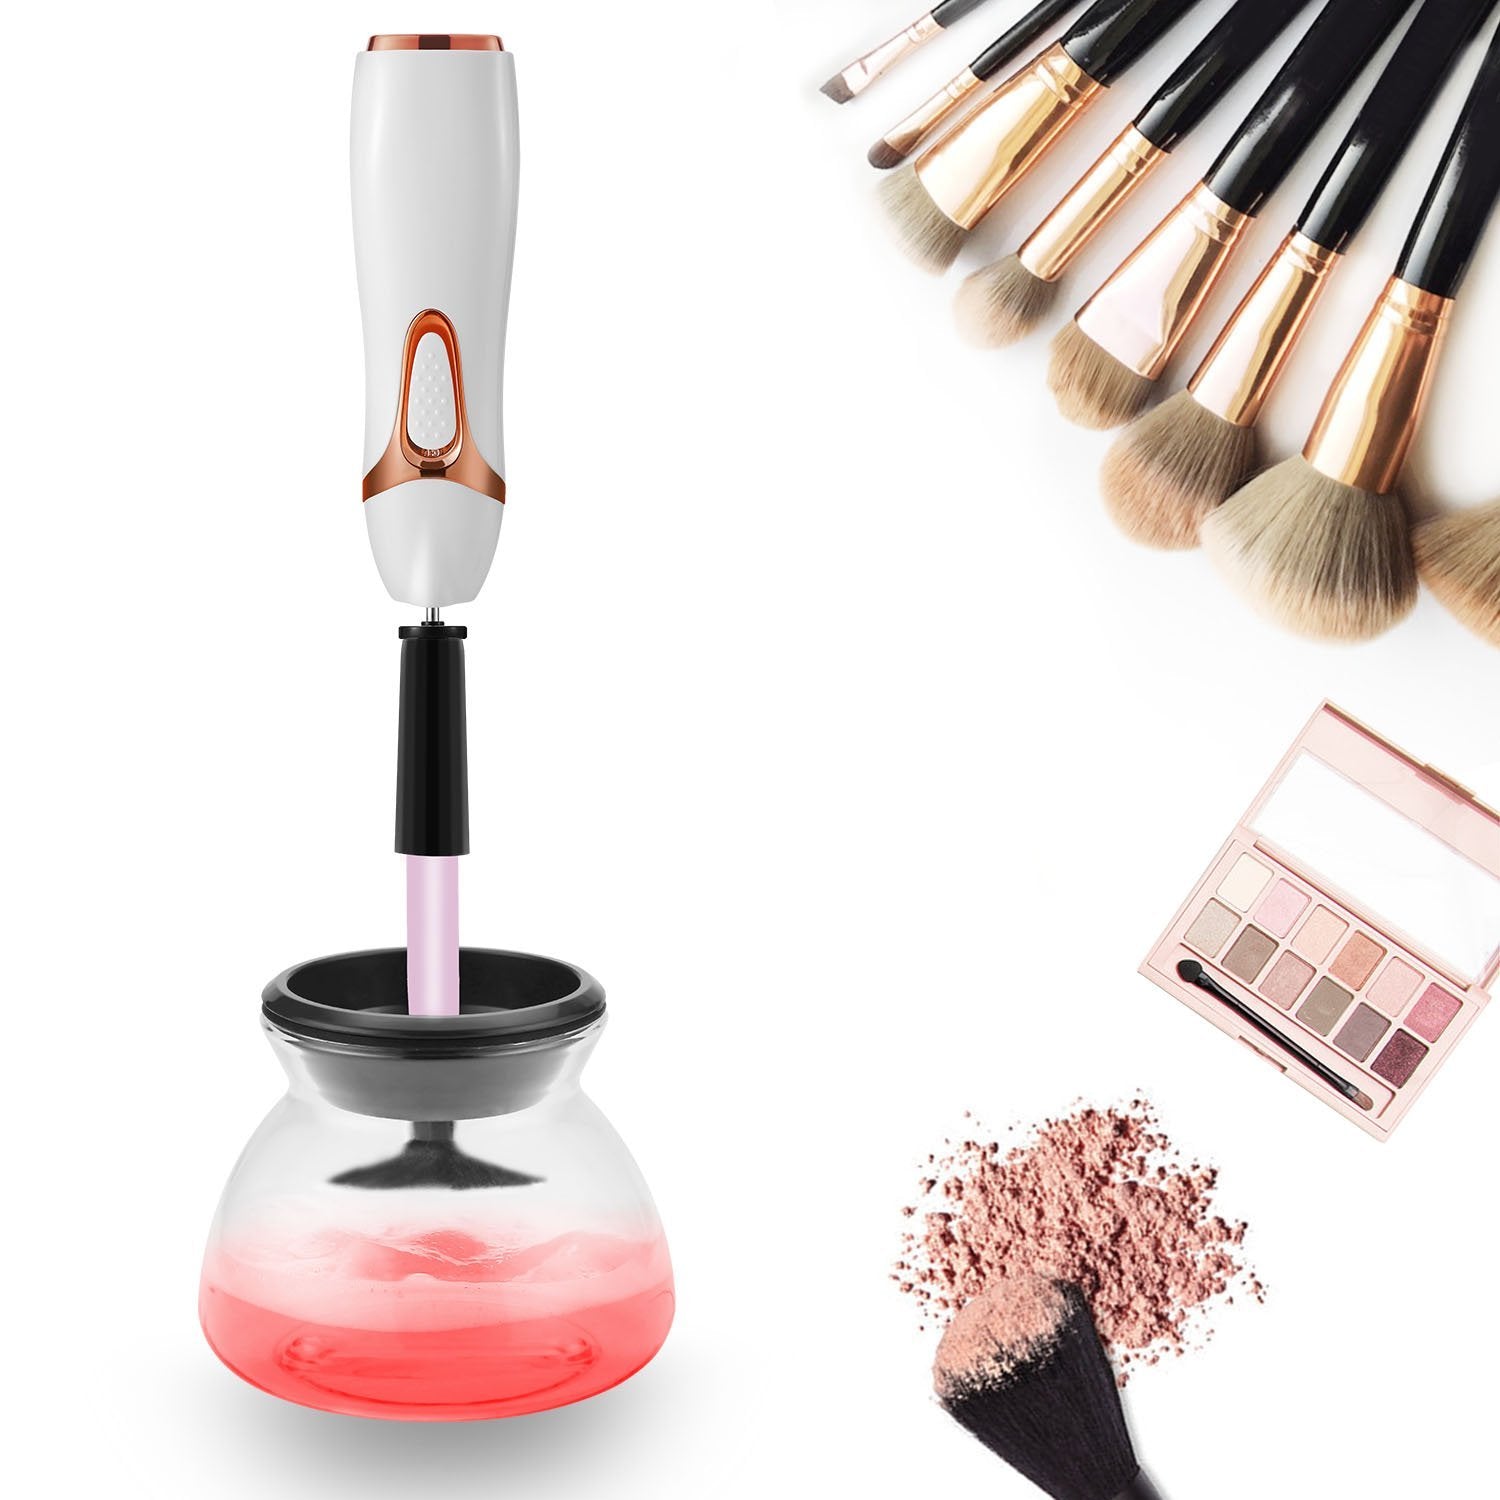 Plutput Makeup Brush Cleaner Machine Electric Makeup Brush Wash Machine for All Size Brushes Automatic Cosmetic Brush Clean Tool White Pink